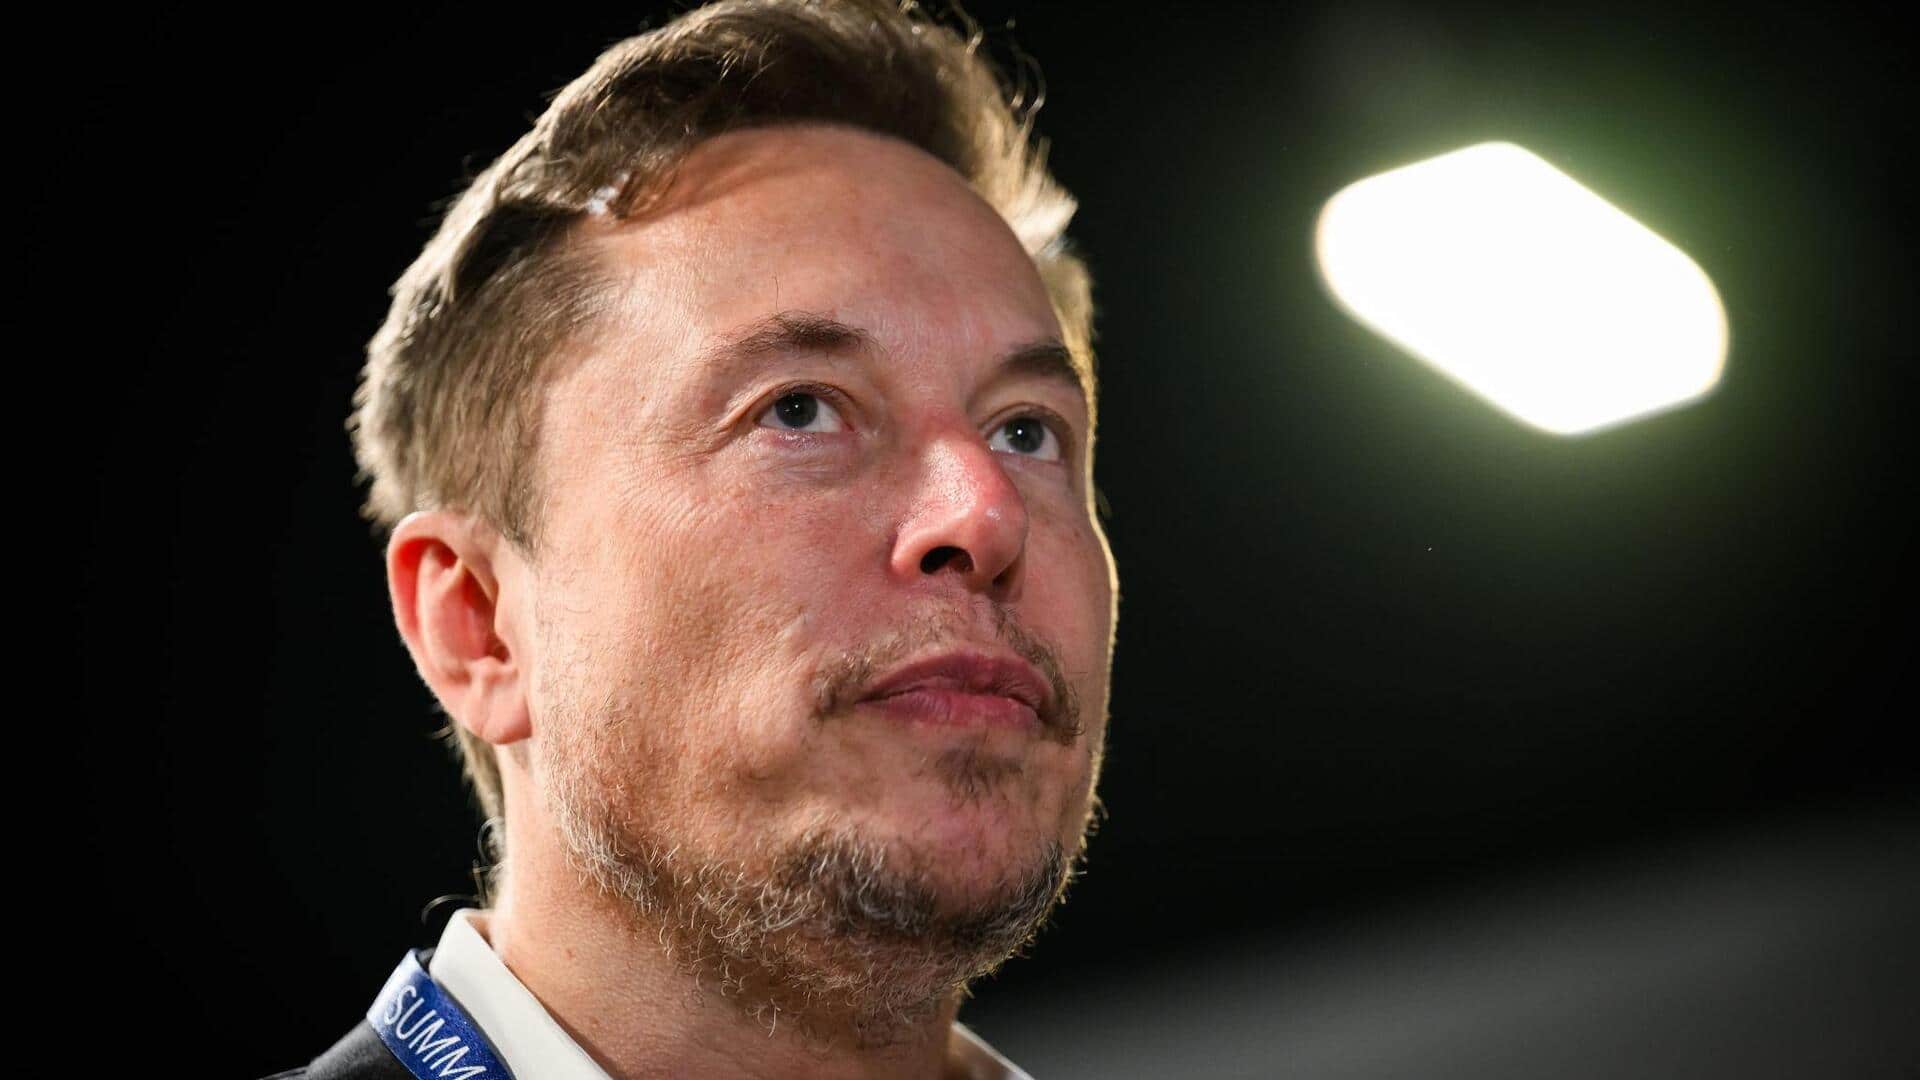 Musk was probably 'under influence' when tweeting about Tesla's privatization